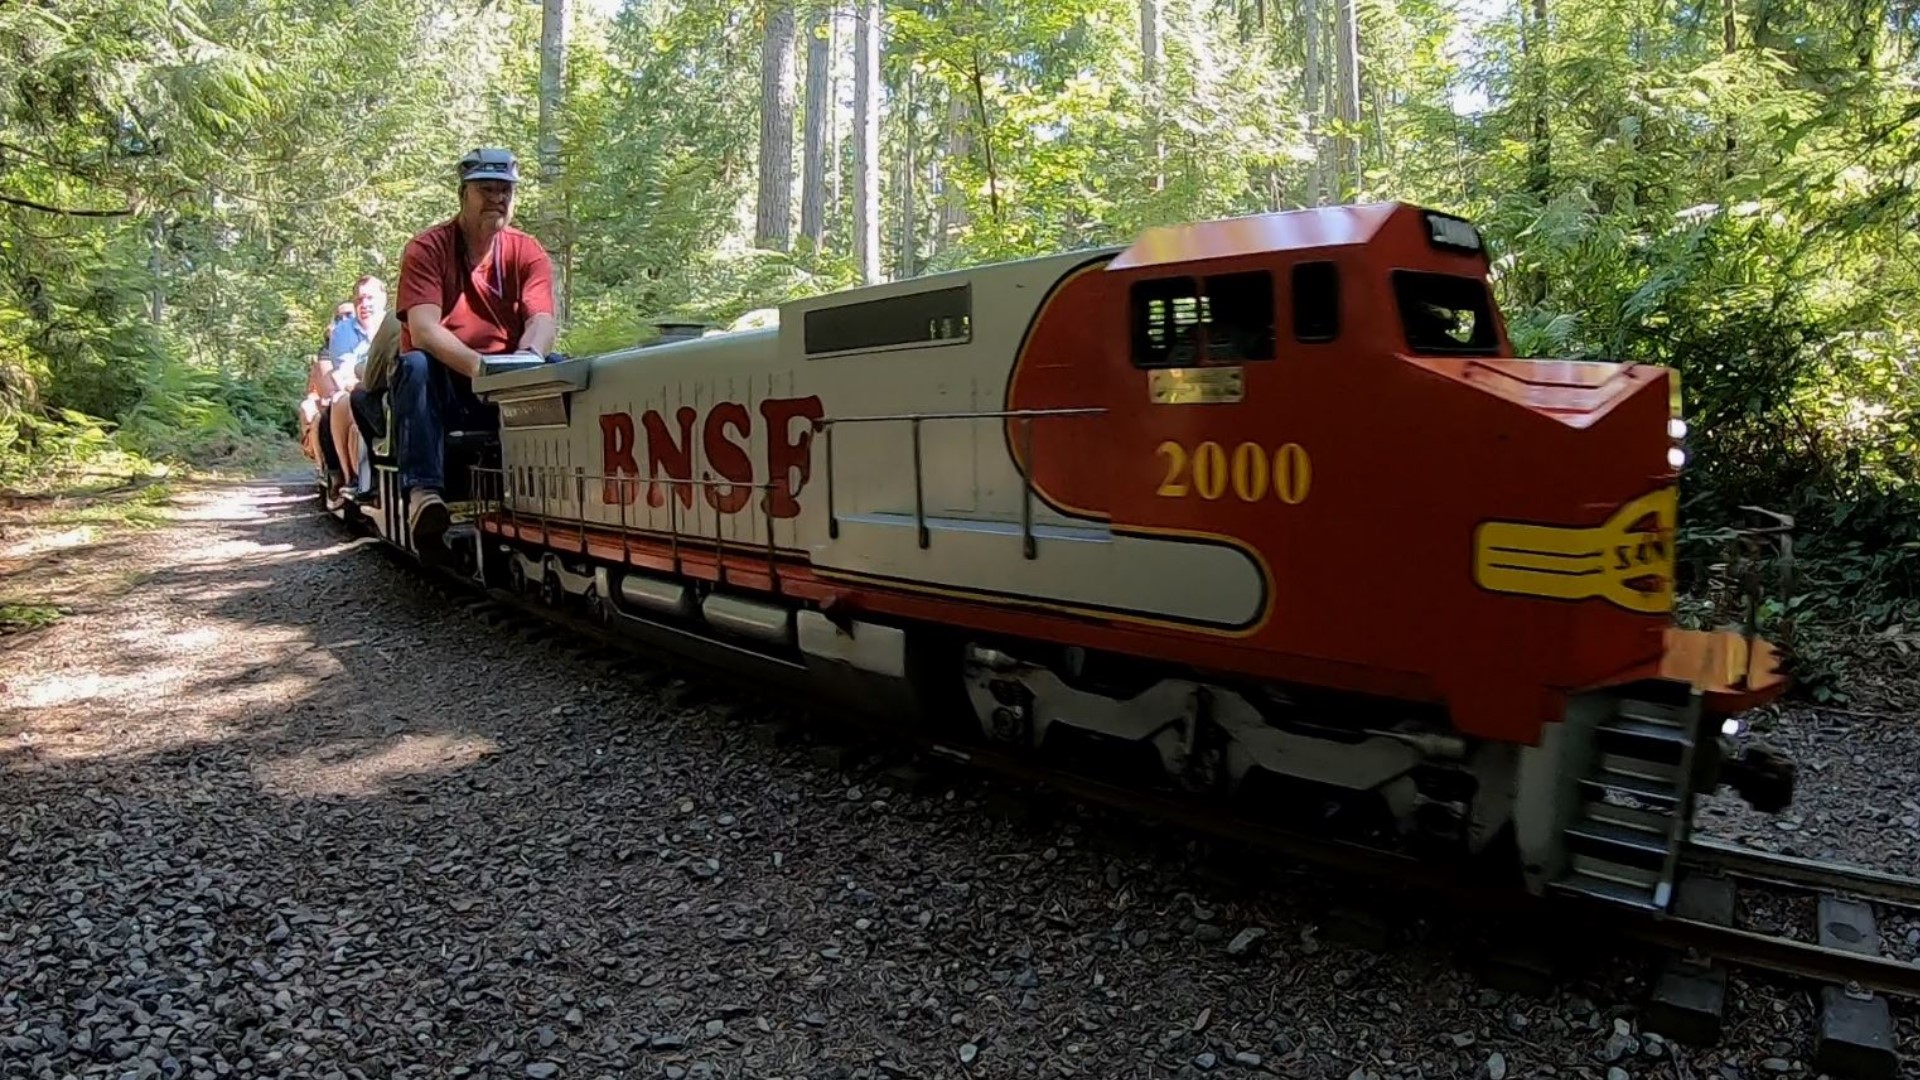 Your family can ride these miniature trains for free